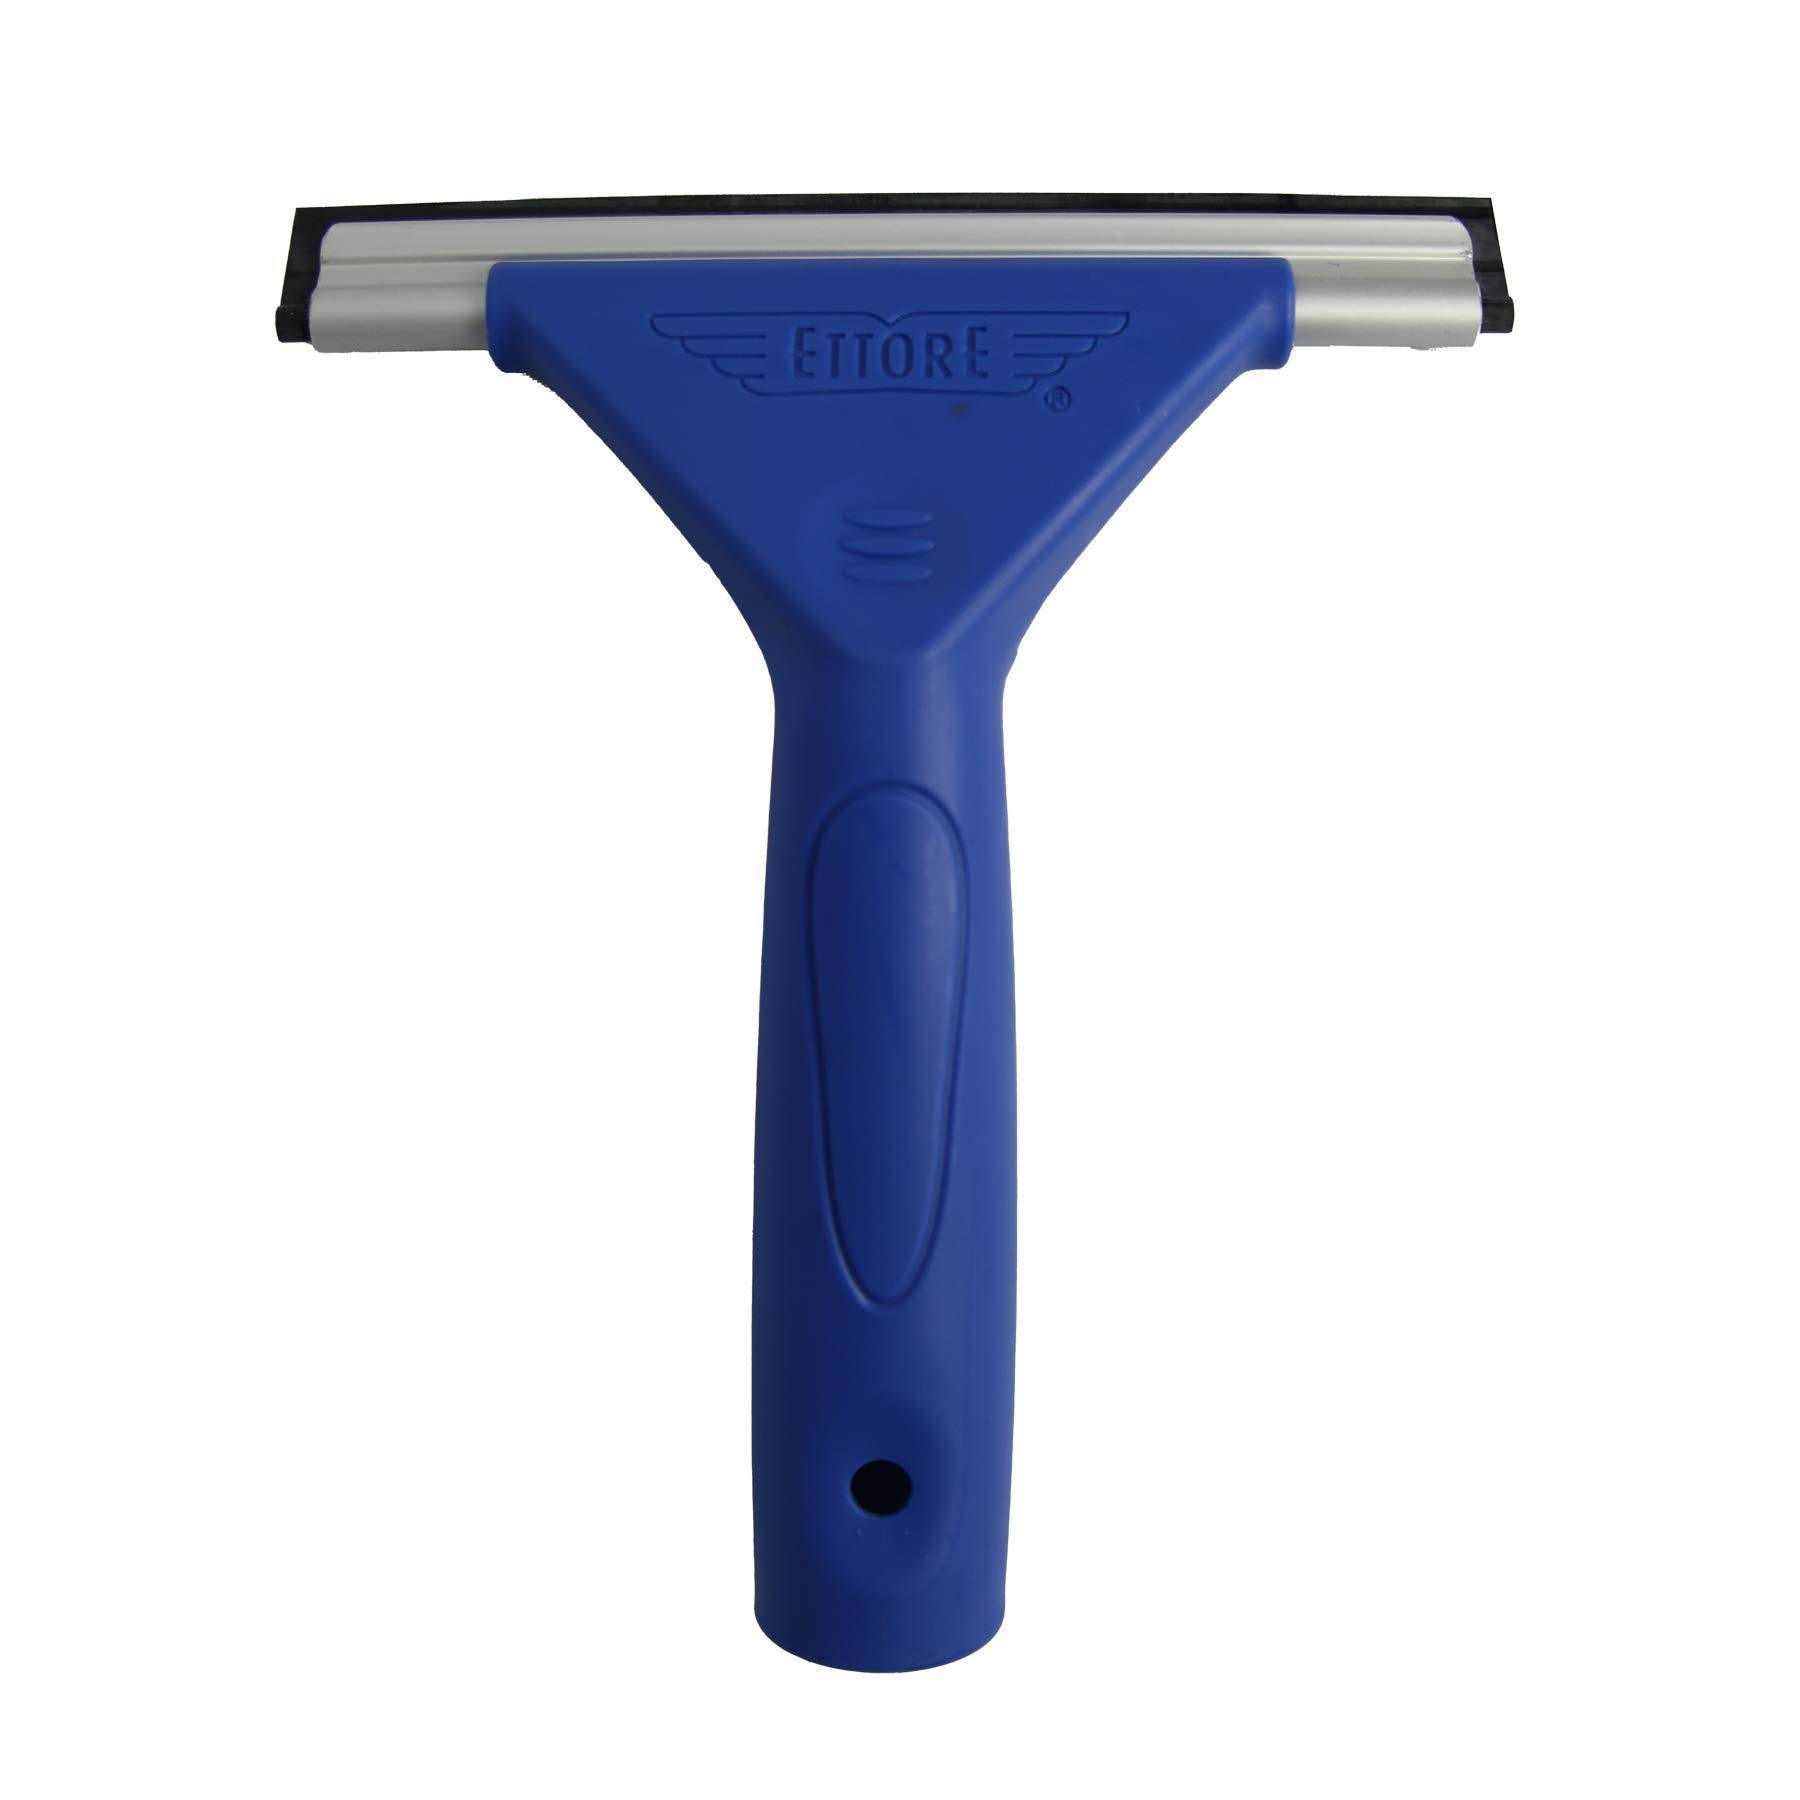 Ettore All-Purpose 6 in. Squeegee for Stainless Steel Cleaning | Image